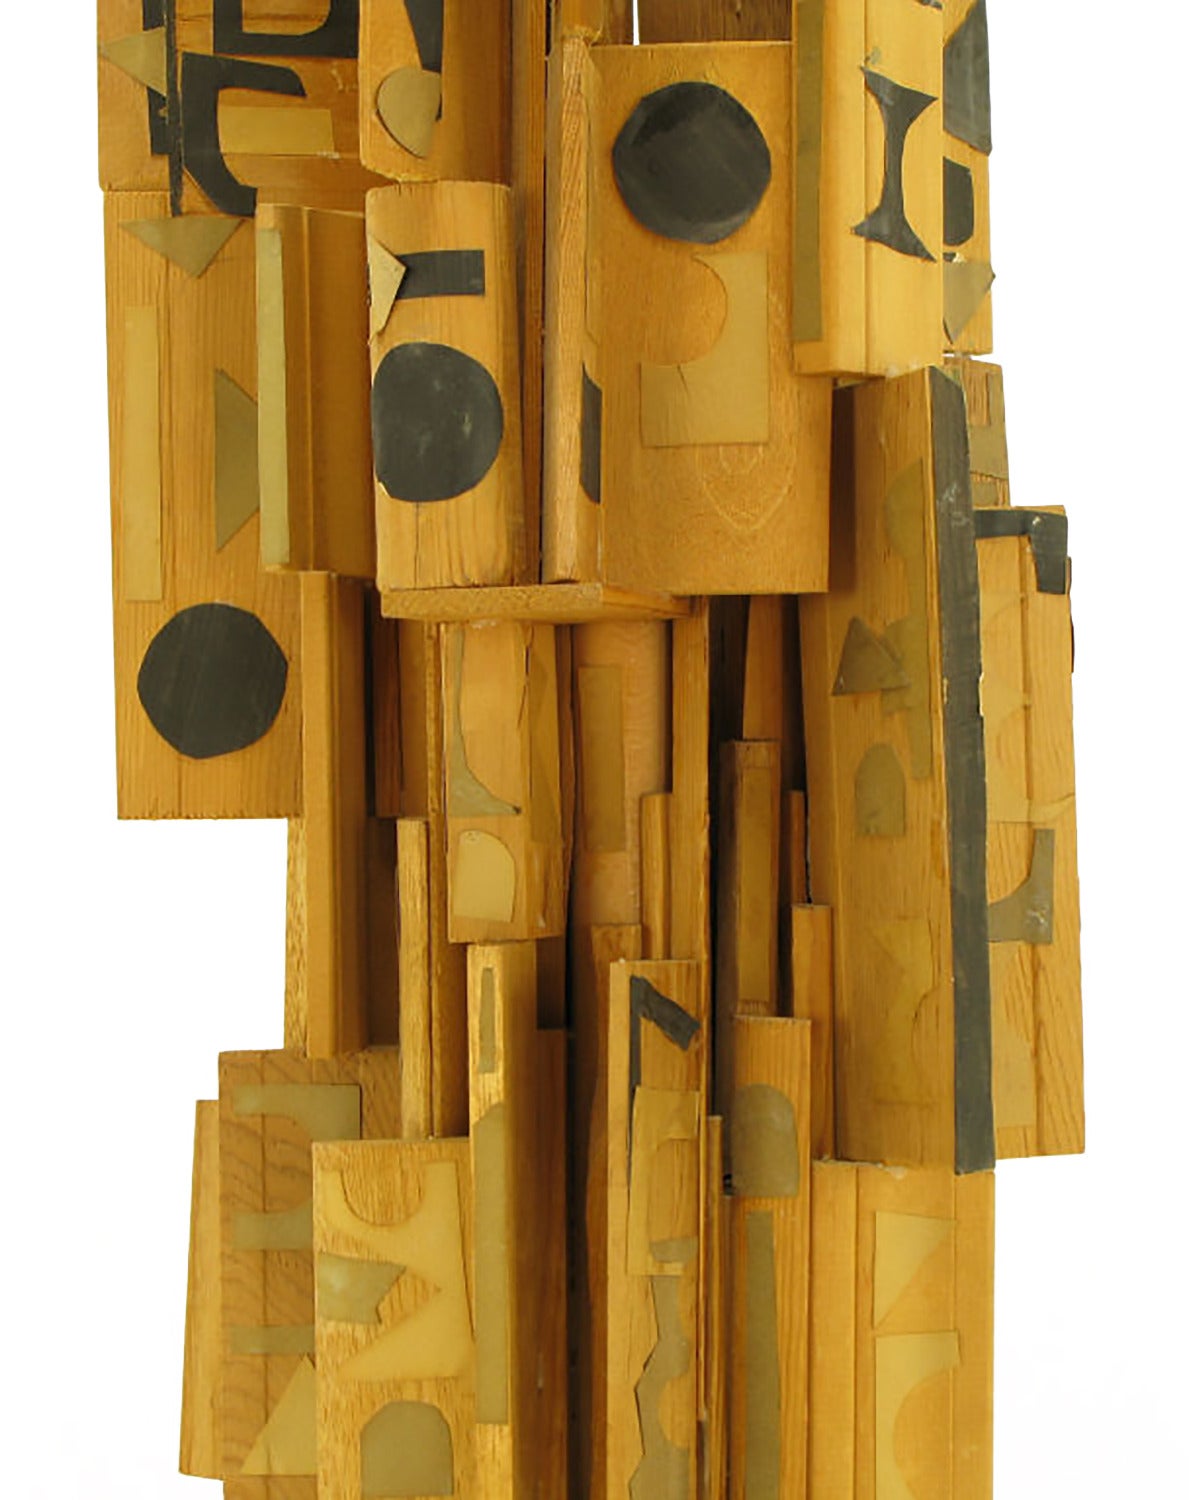 Outsider Art Wood Sculpture with Geometric Appliques In Good Condition For Sale In Chicago, IL